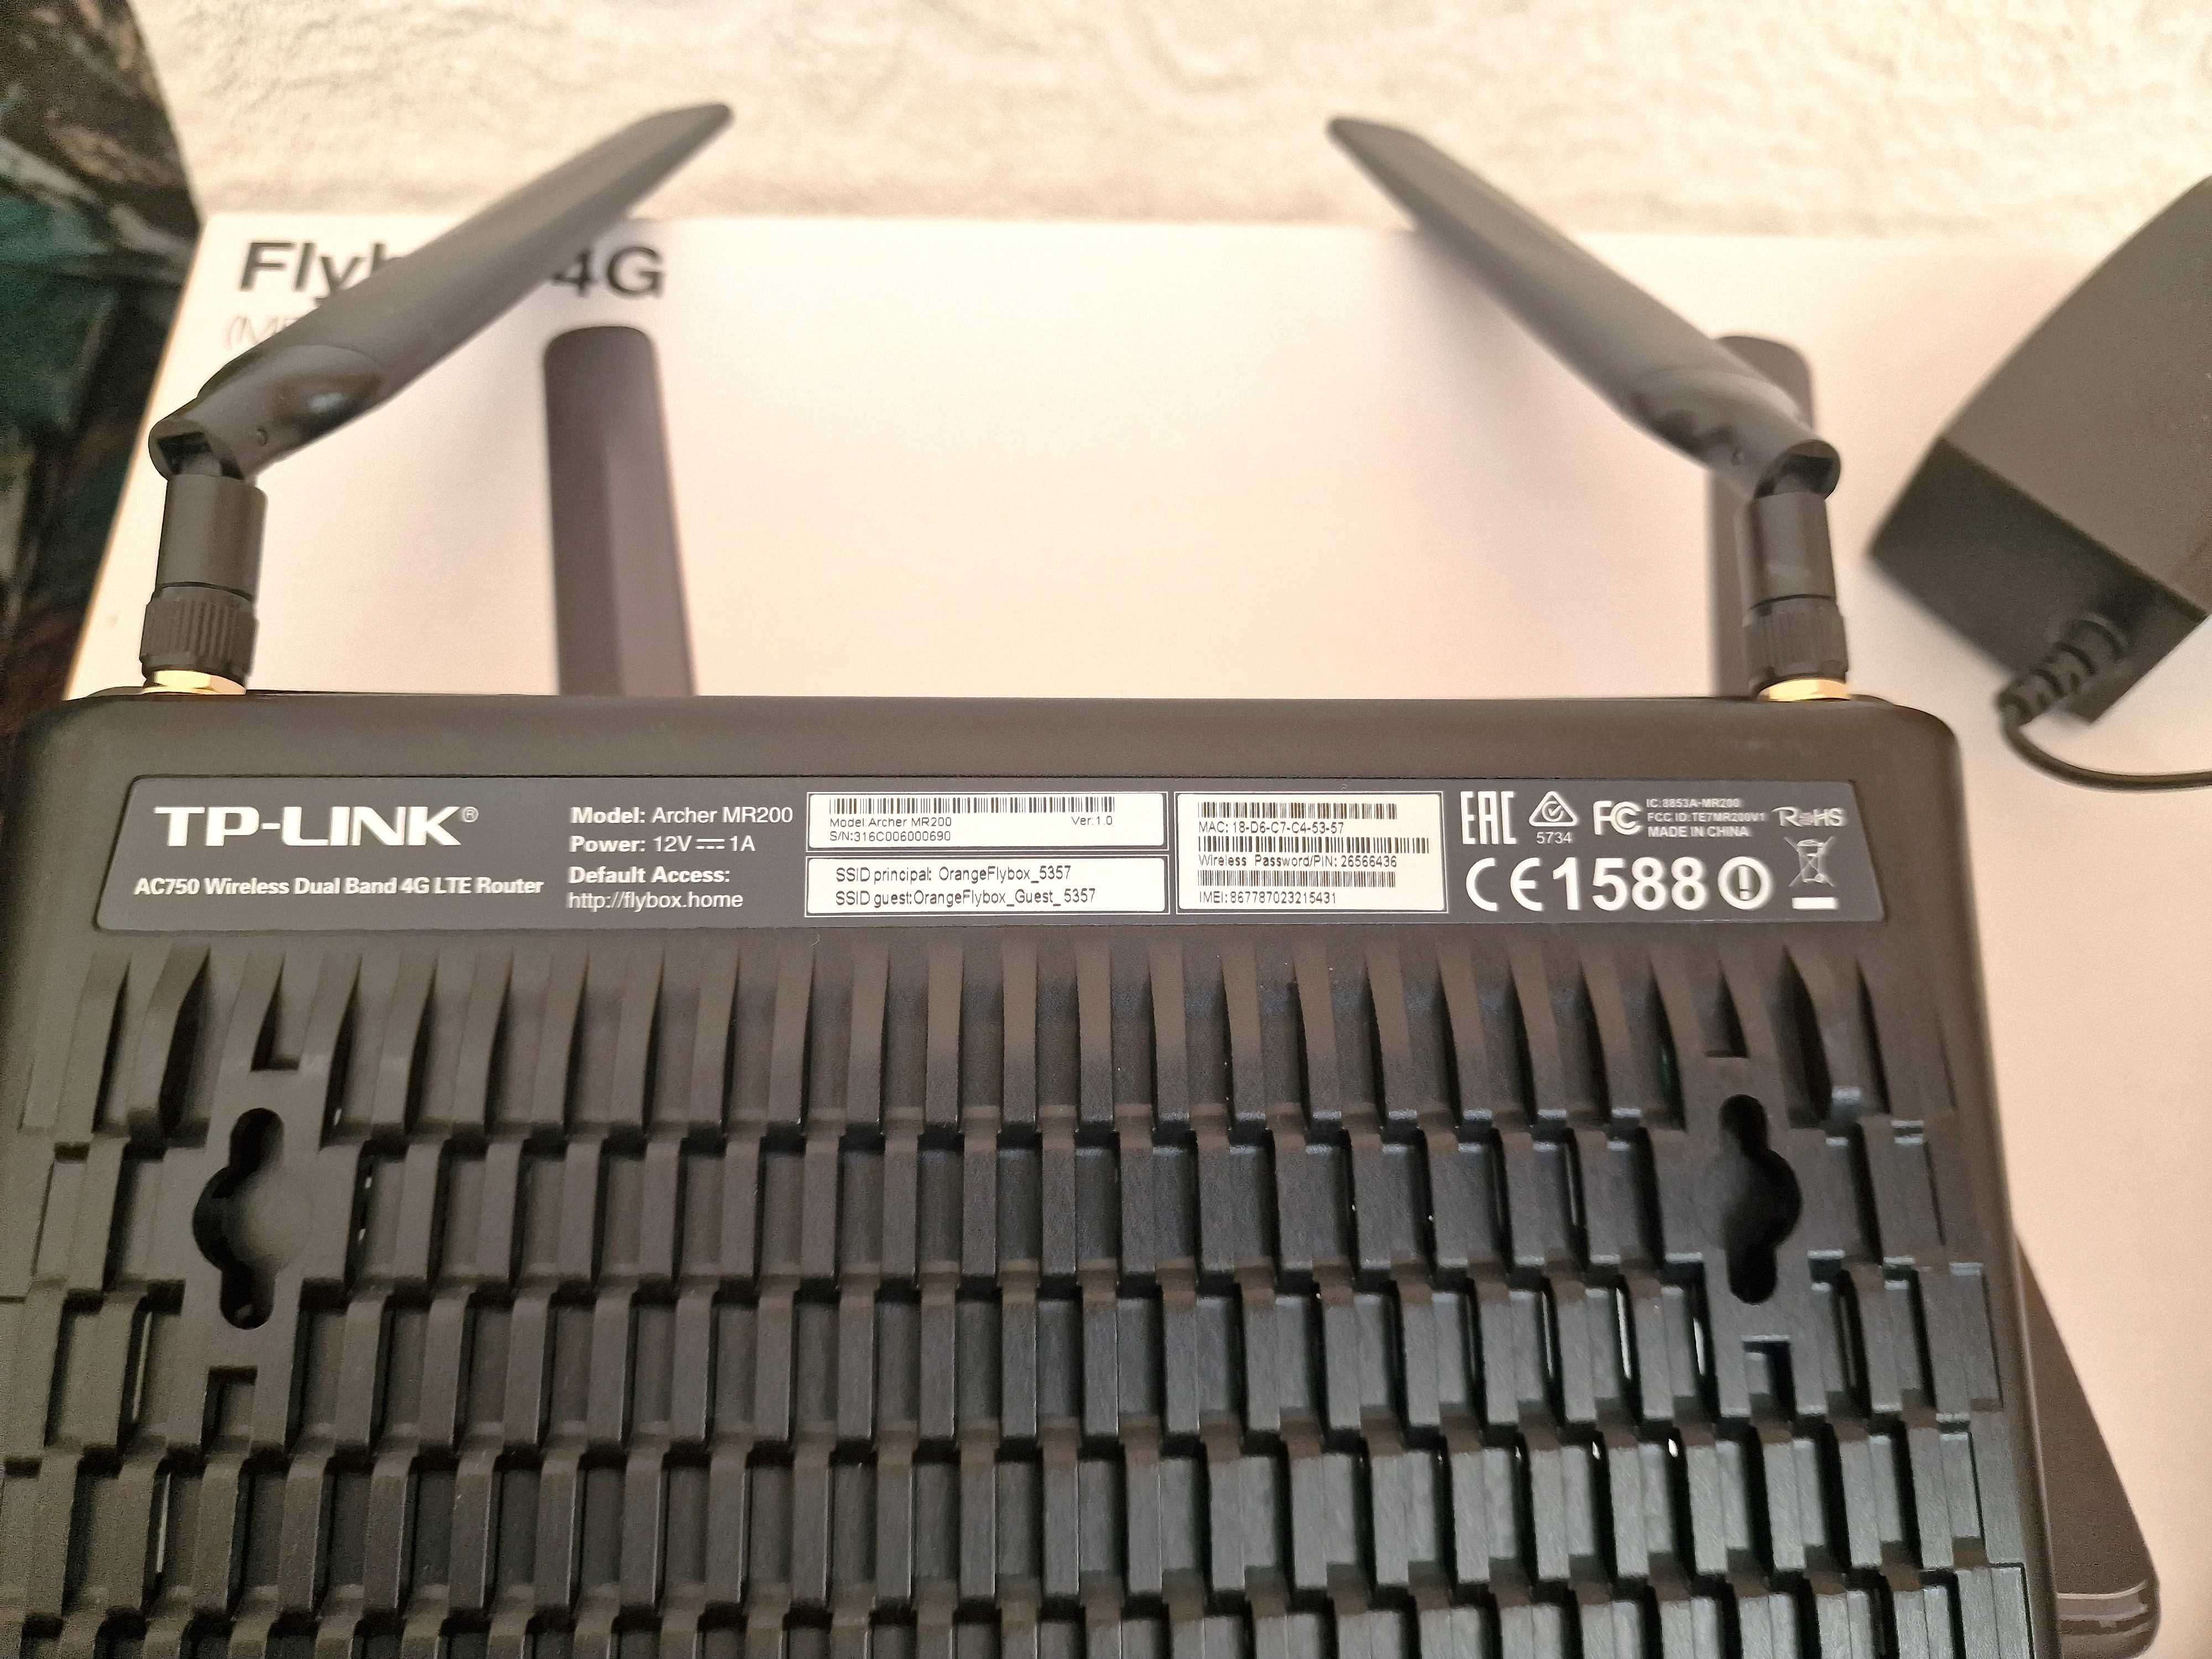 Router Wireless TP-Link Archer MR200 Dual Band AC750, 3G/4G LTE SIM